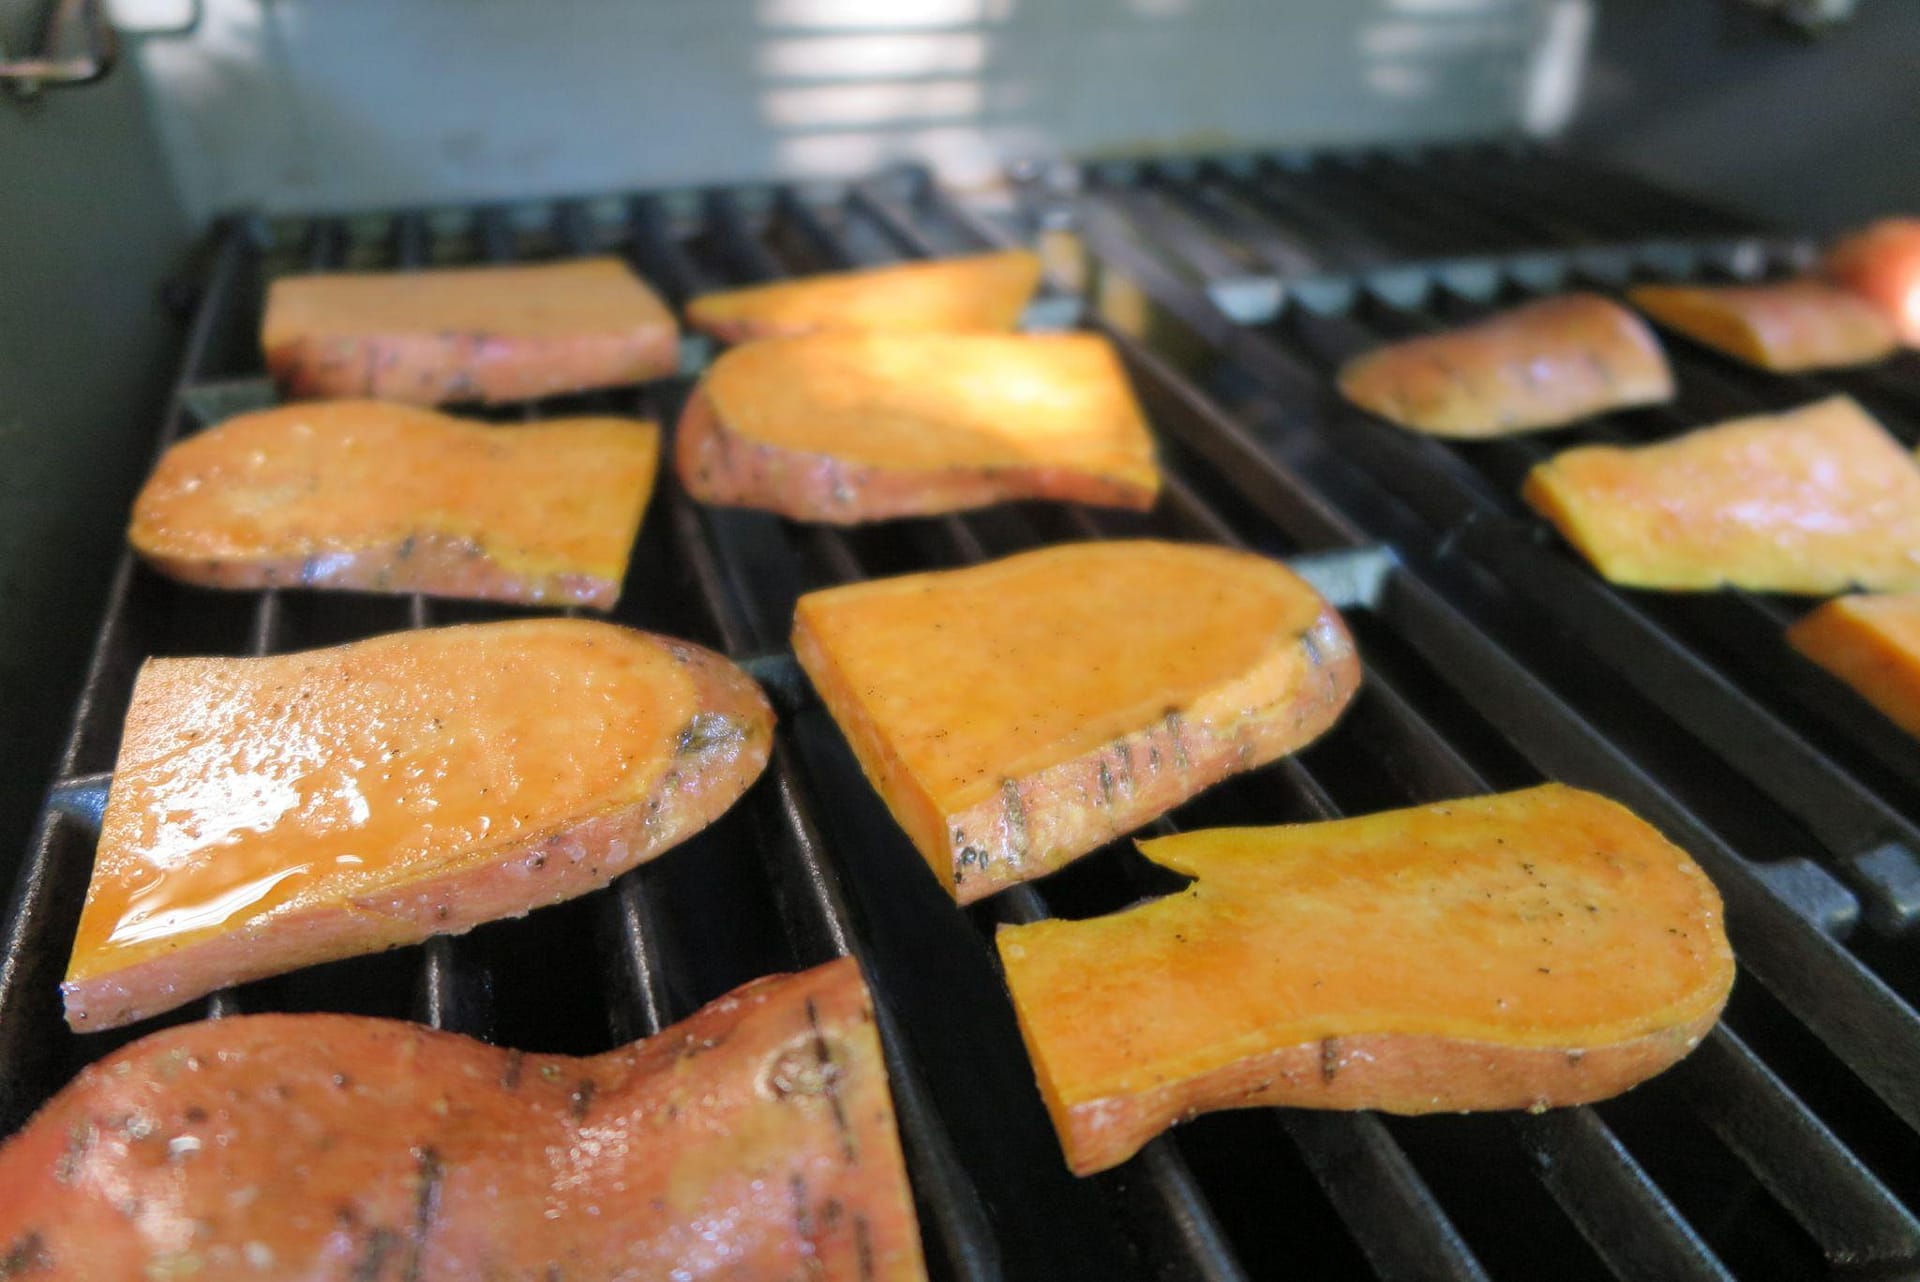 Sweet potatoes lined up on a grill